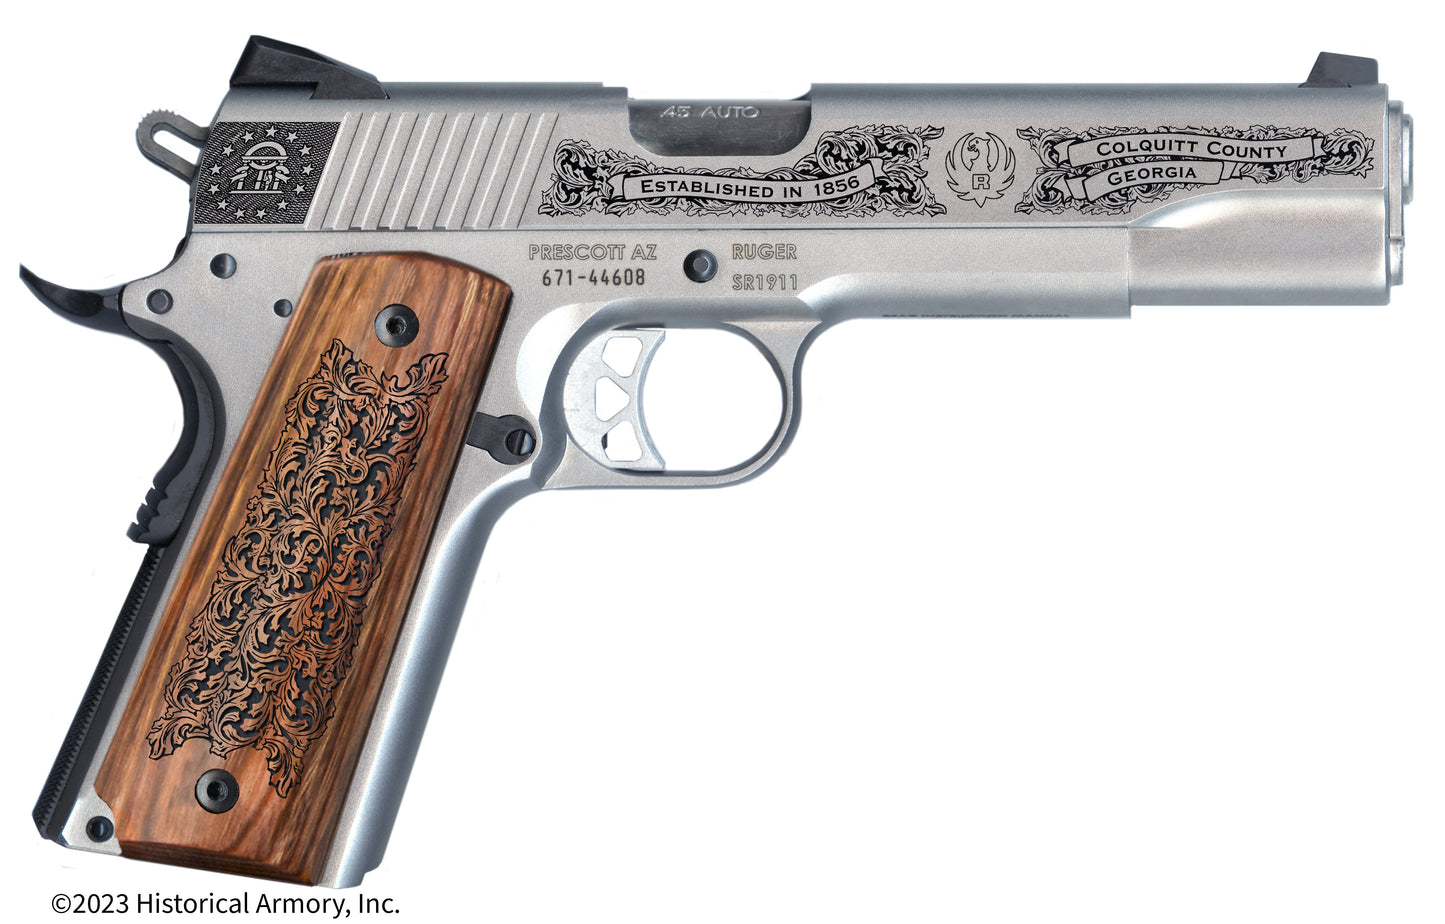 Colquitt County Georgia Engraved .45 Auto Ruger 1911